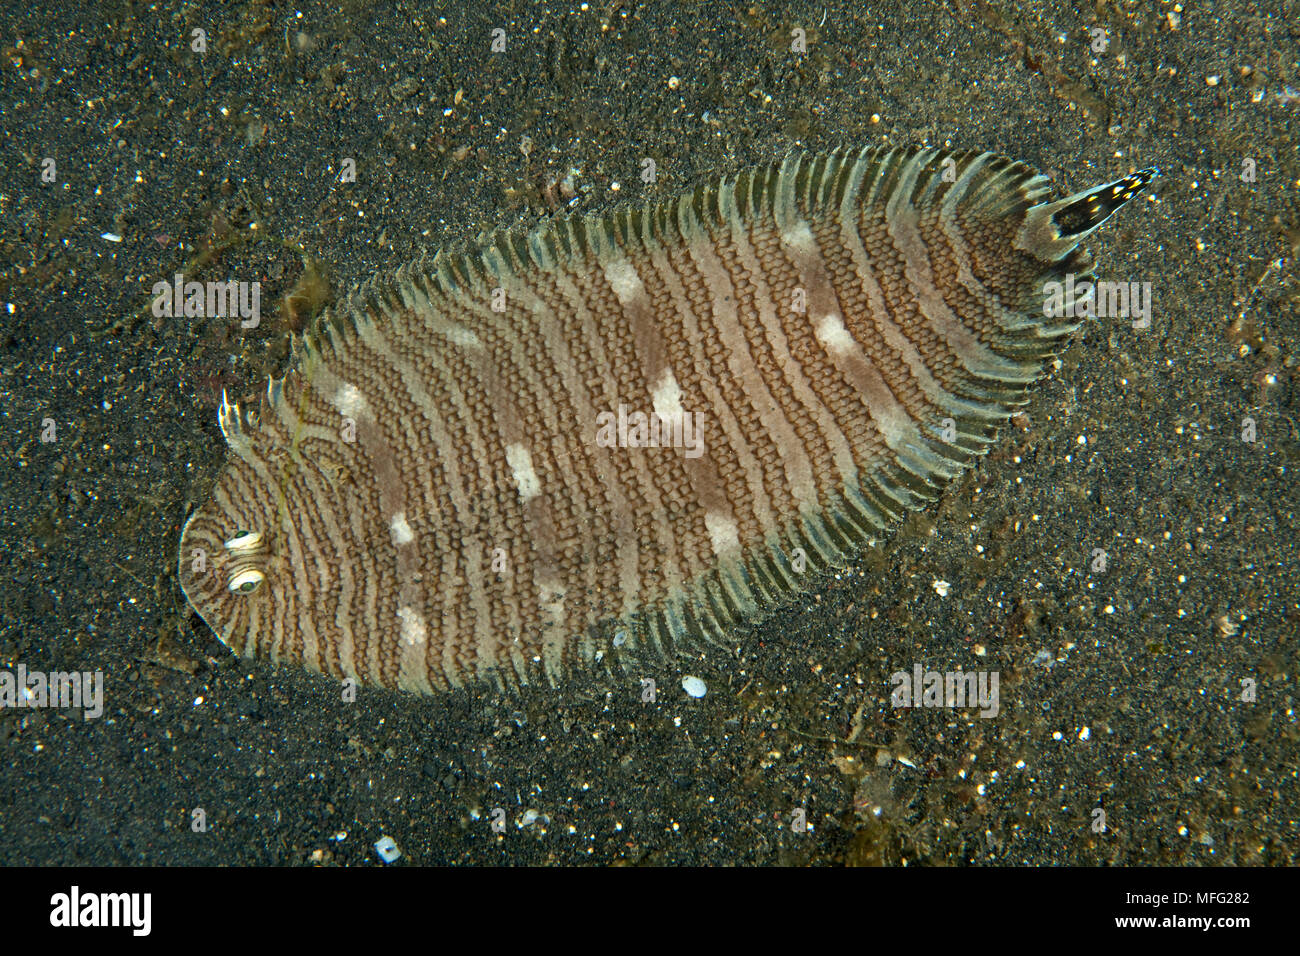 Spotted-Tail sole, Zebrias fasciatus, Lembeh Strait, North Sulawesi, Indonesia, Pacific Ocean Stock Photo